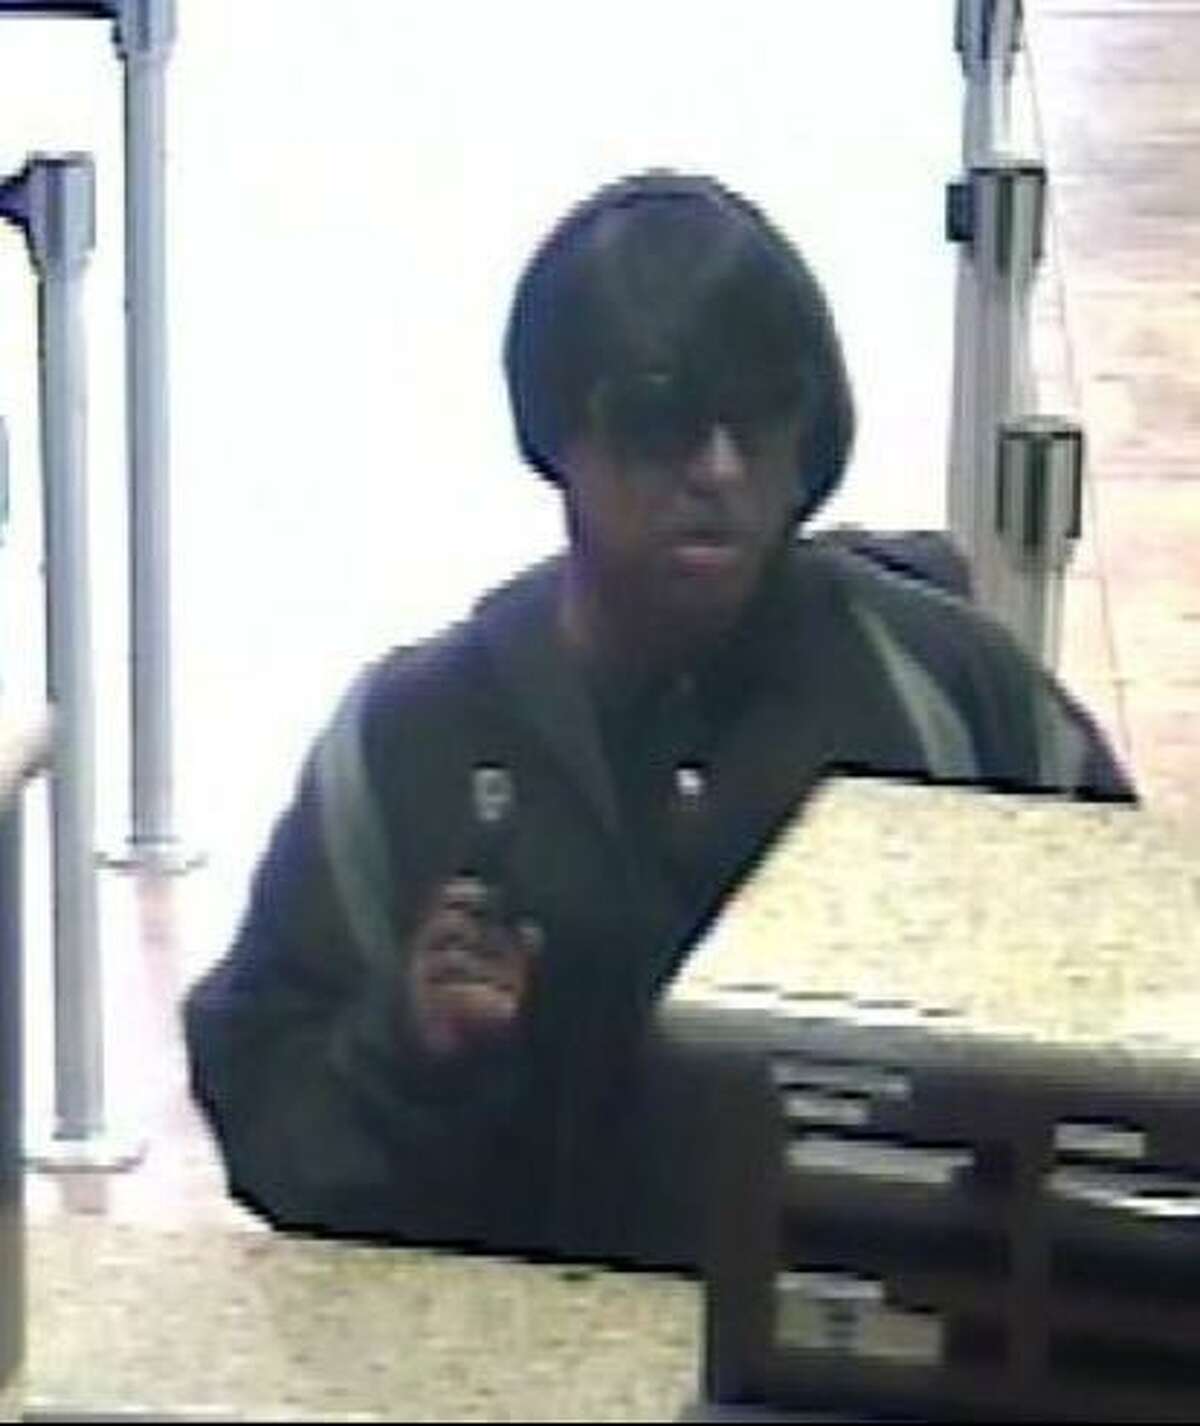 On 11-30-12, at approximate 9:16am, the Security Services Federal Credit Union, 1692 State Hwy 46 was robbed by the individual pictured. Anyone with information can contact New Braunfels Police Department Det. David Schroeder at dschroeder@nbtexas.org.